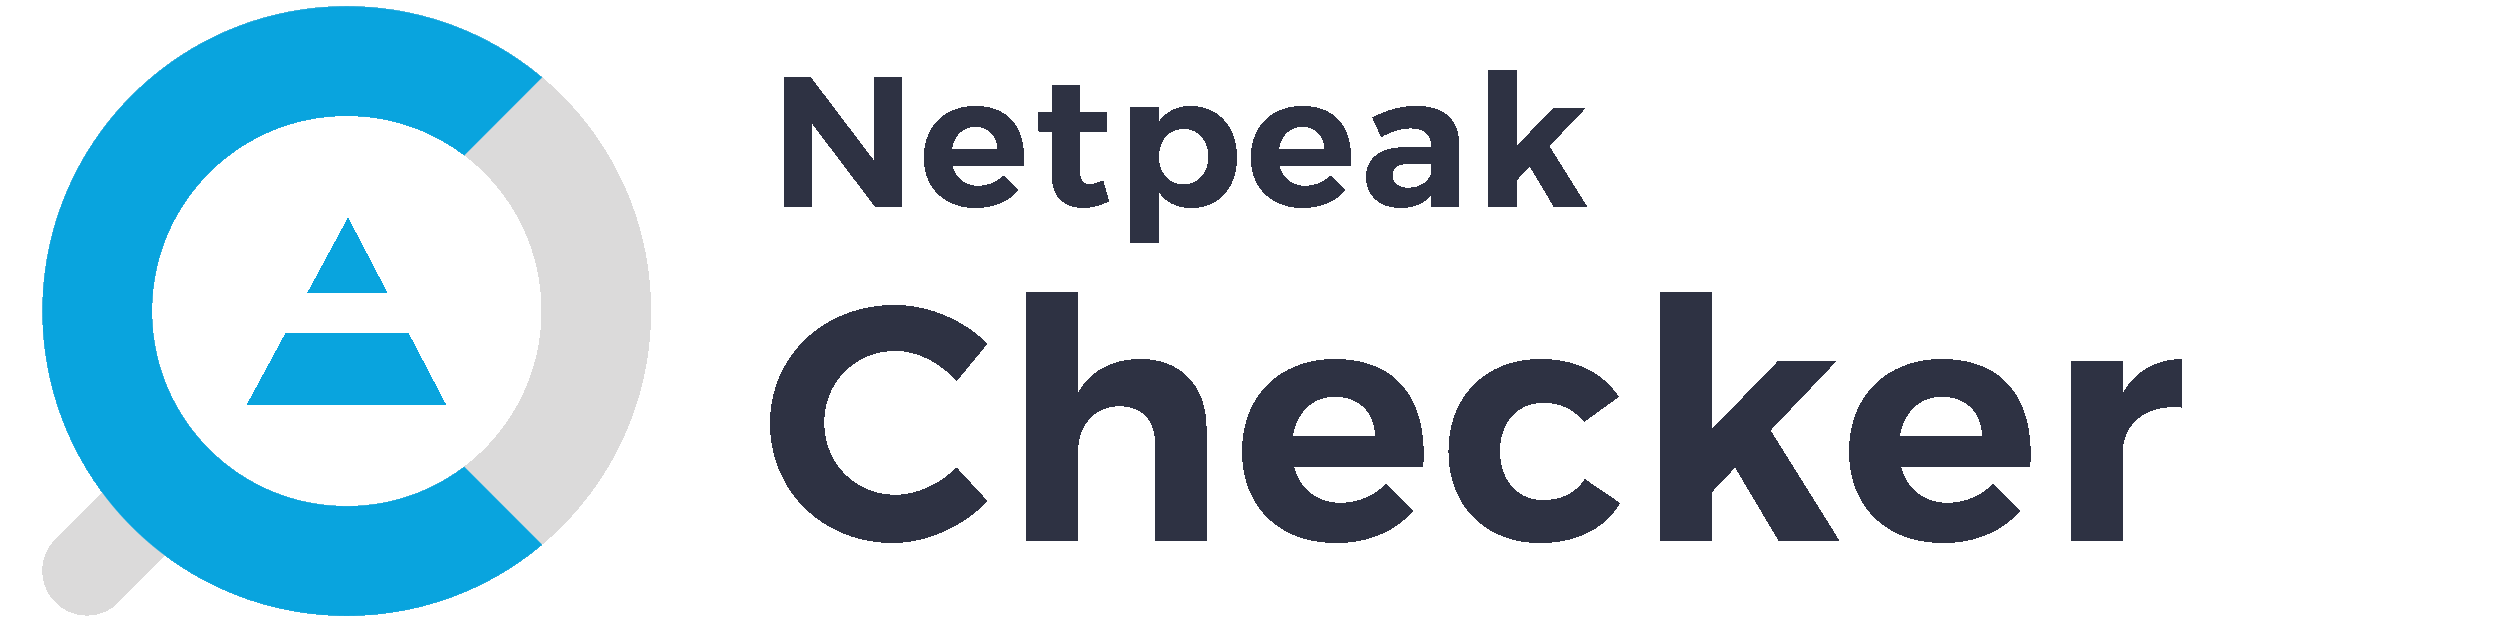 Netpeak Checker helps detect potential web page and content issues.